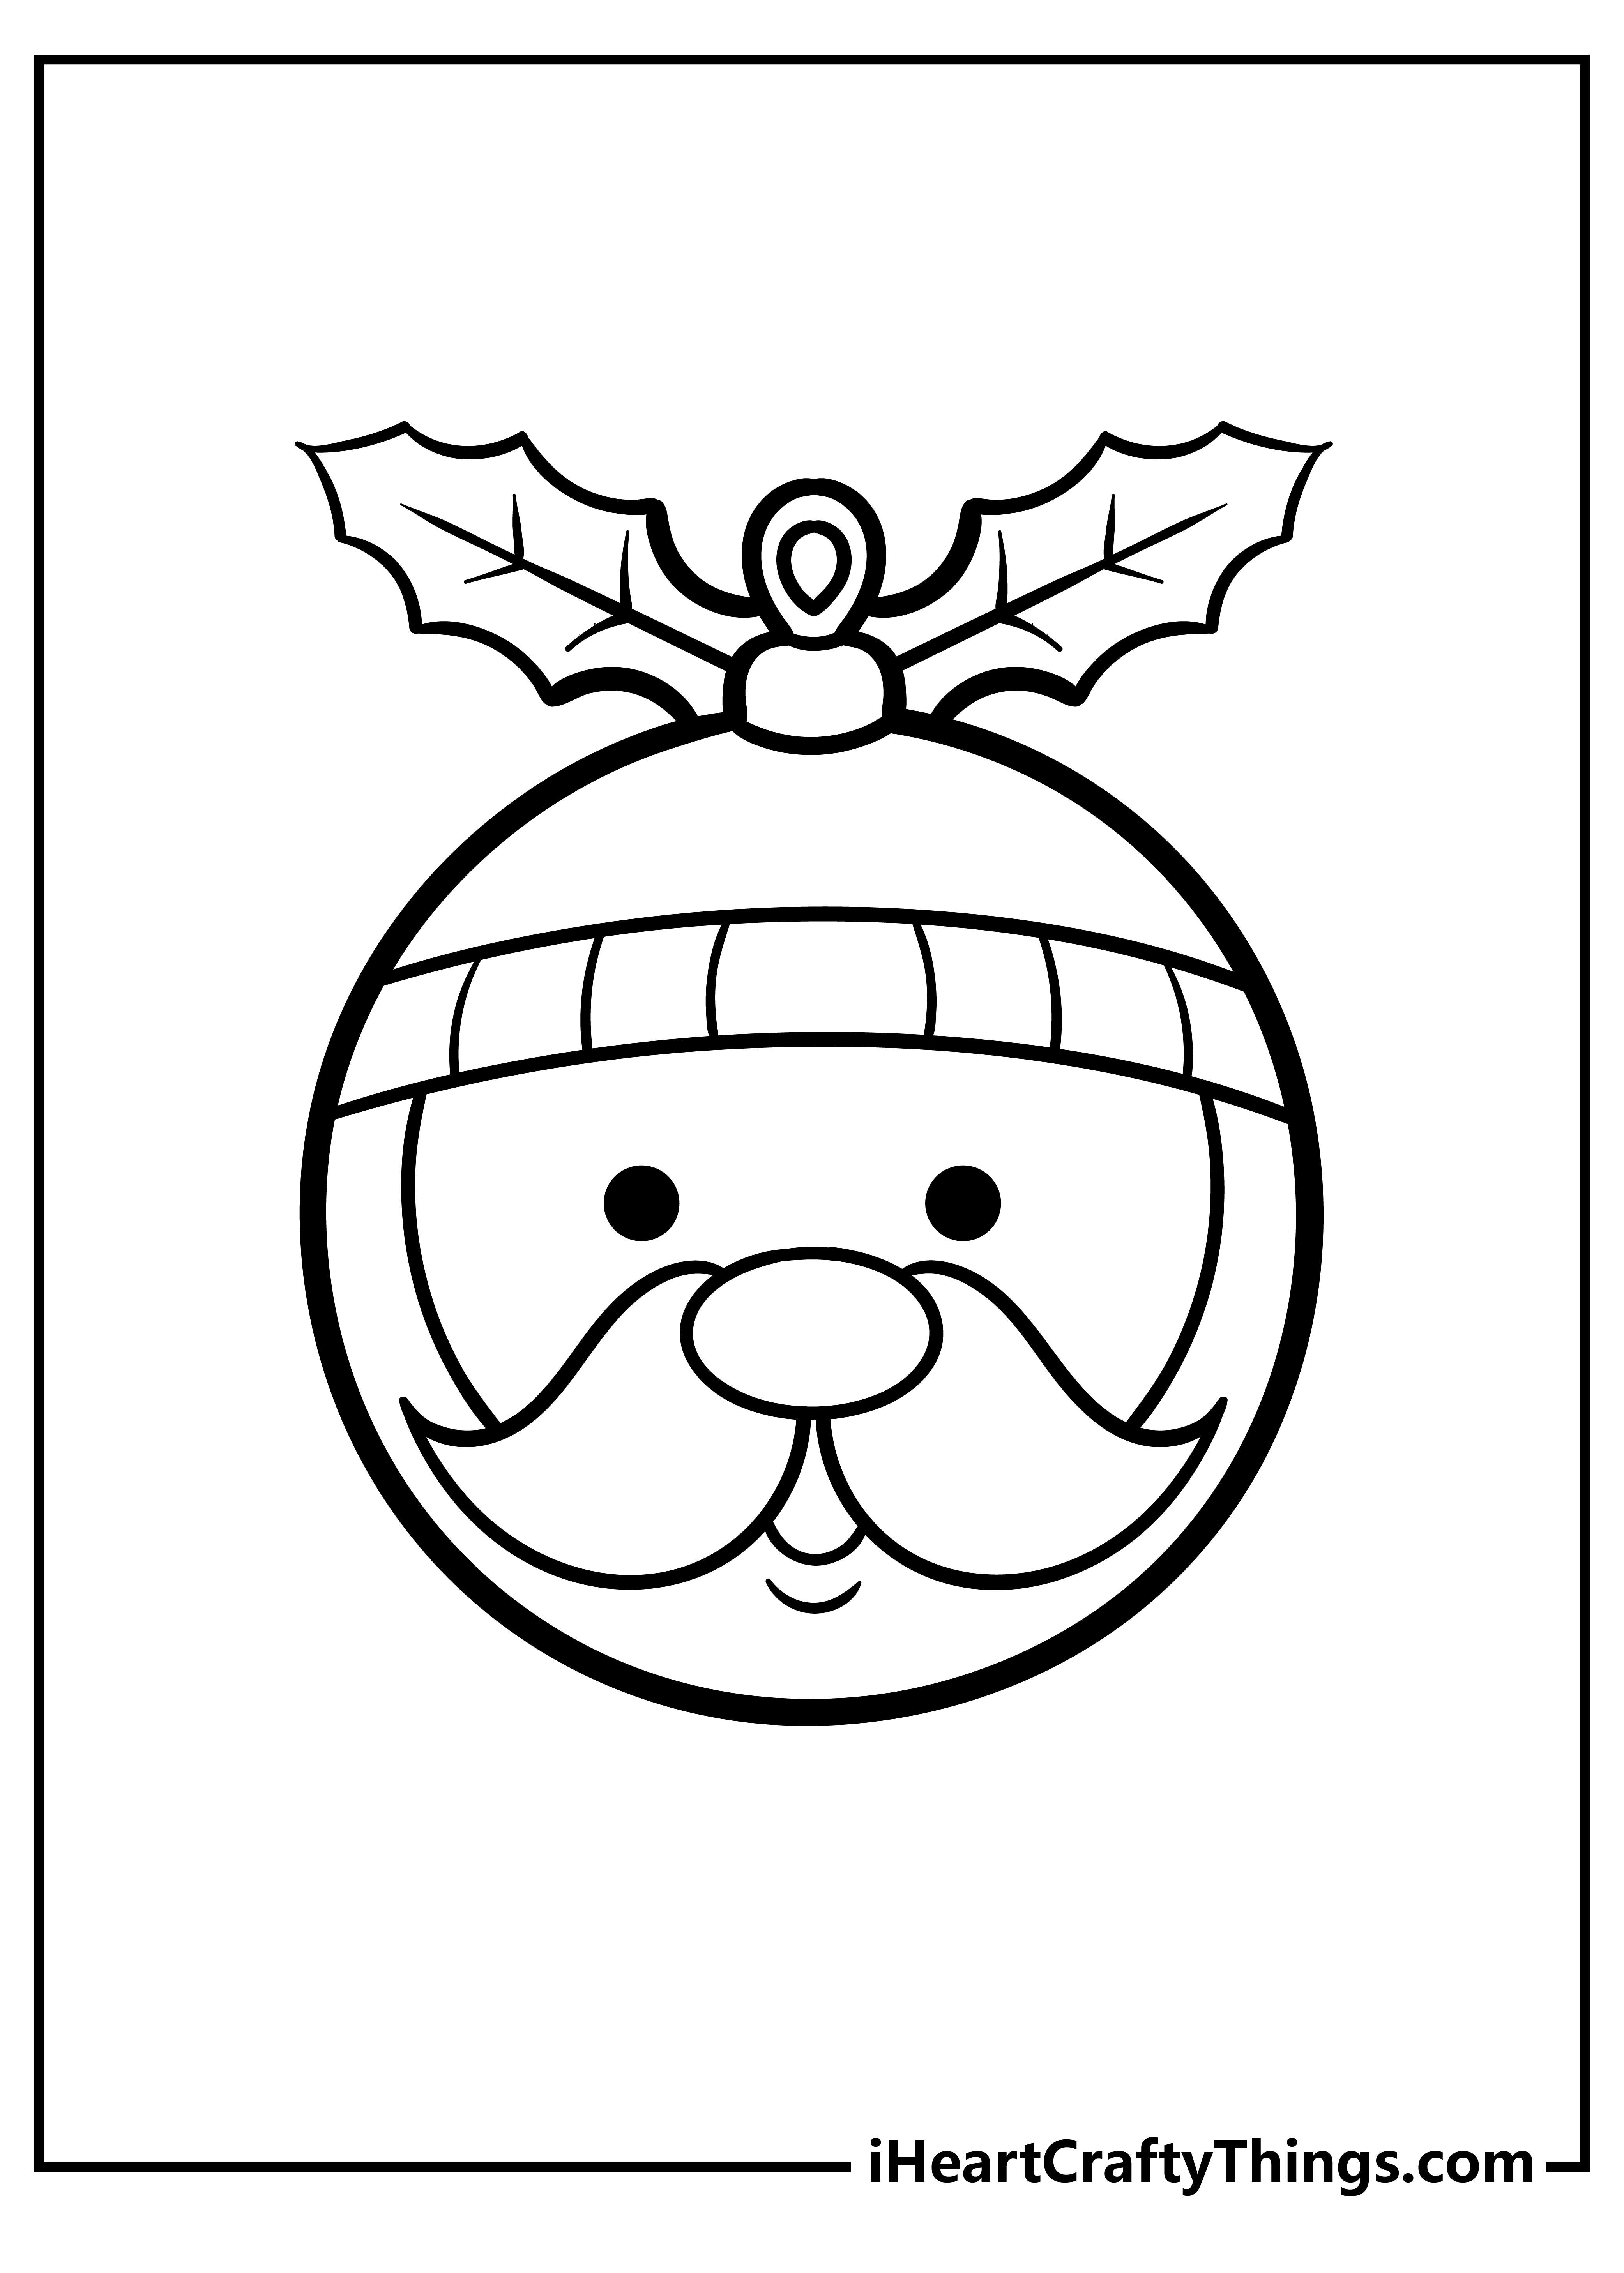 Christmas Ornament Coloring Pages free pdf download